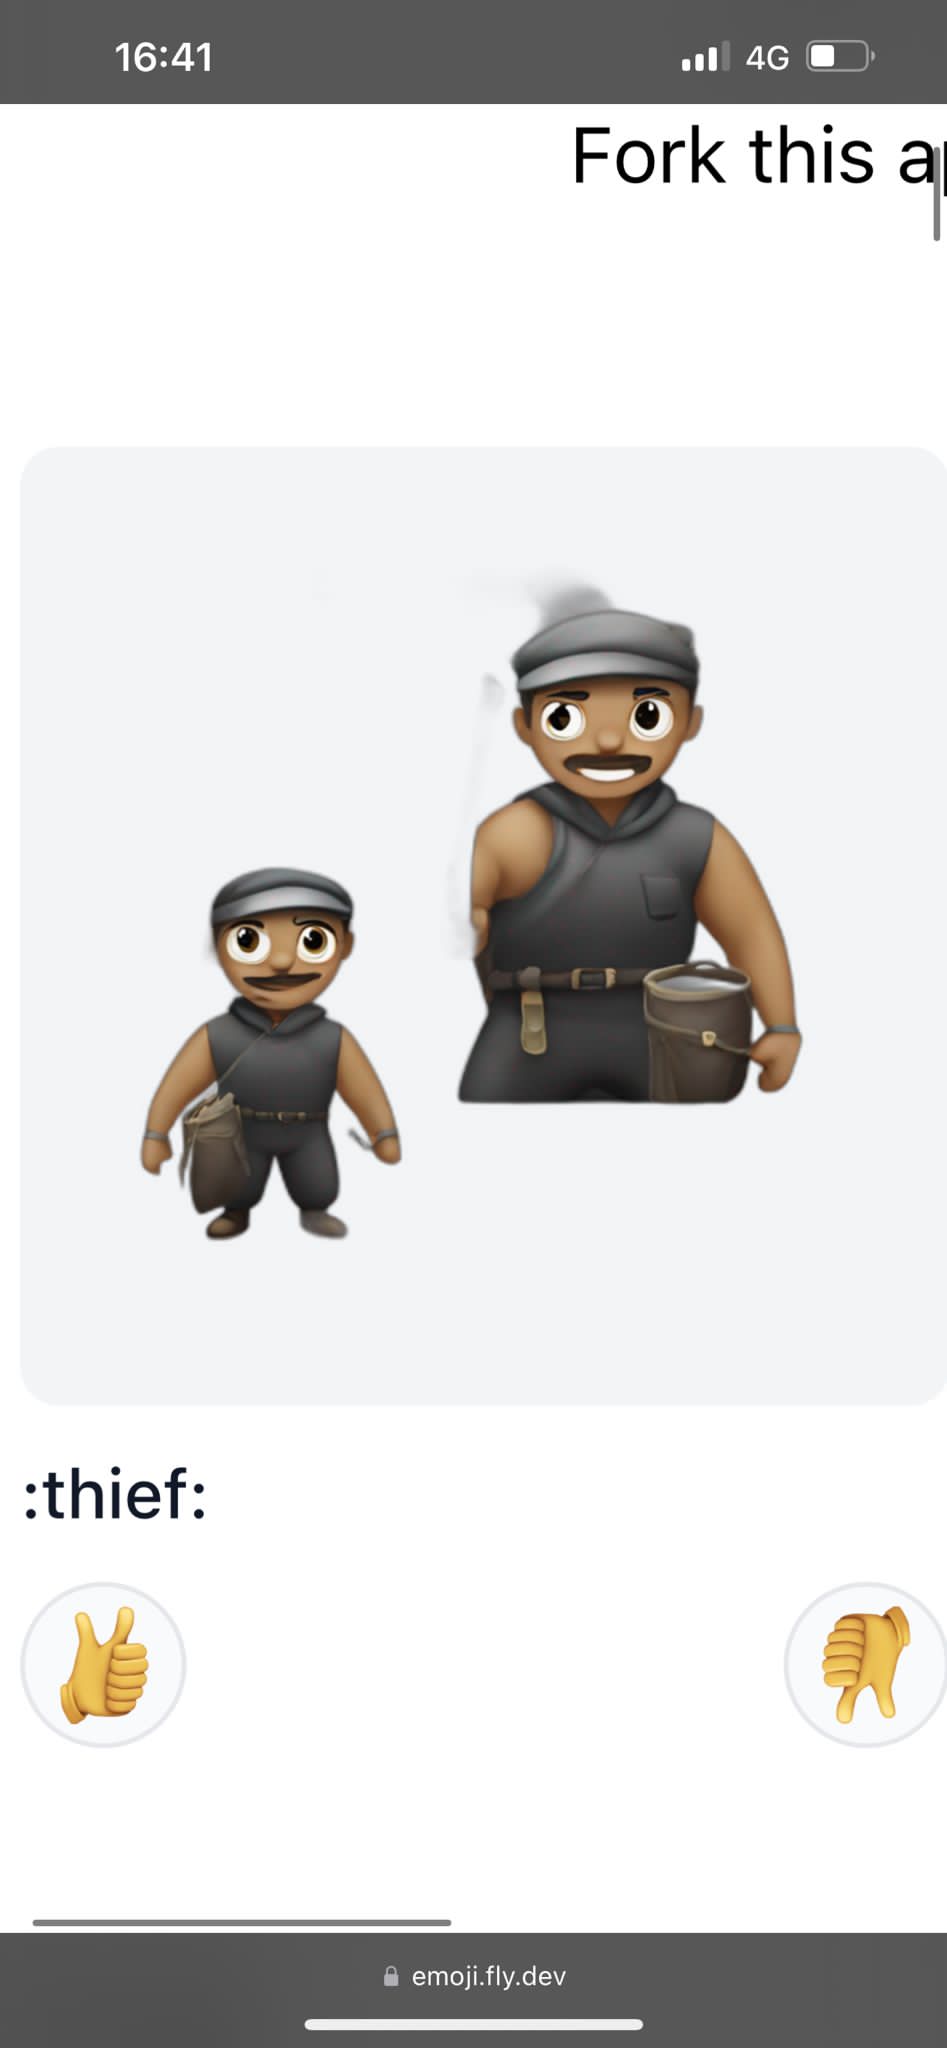 Screenshot of an emoji generated by the EmojiHen tool for the prompt 'thief' showing a Black emoji character dressed in cartoon thief clothing complete with black cap and swag bag